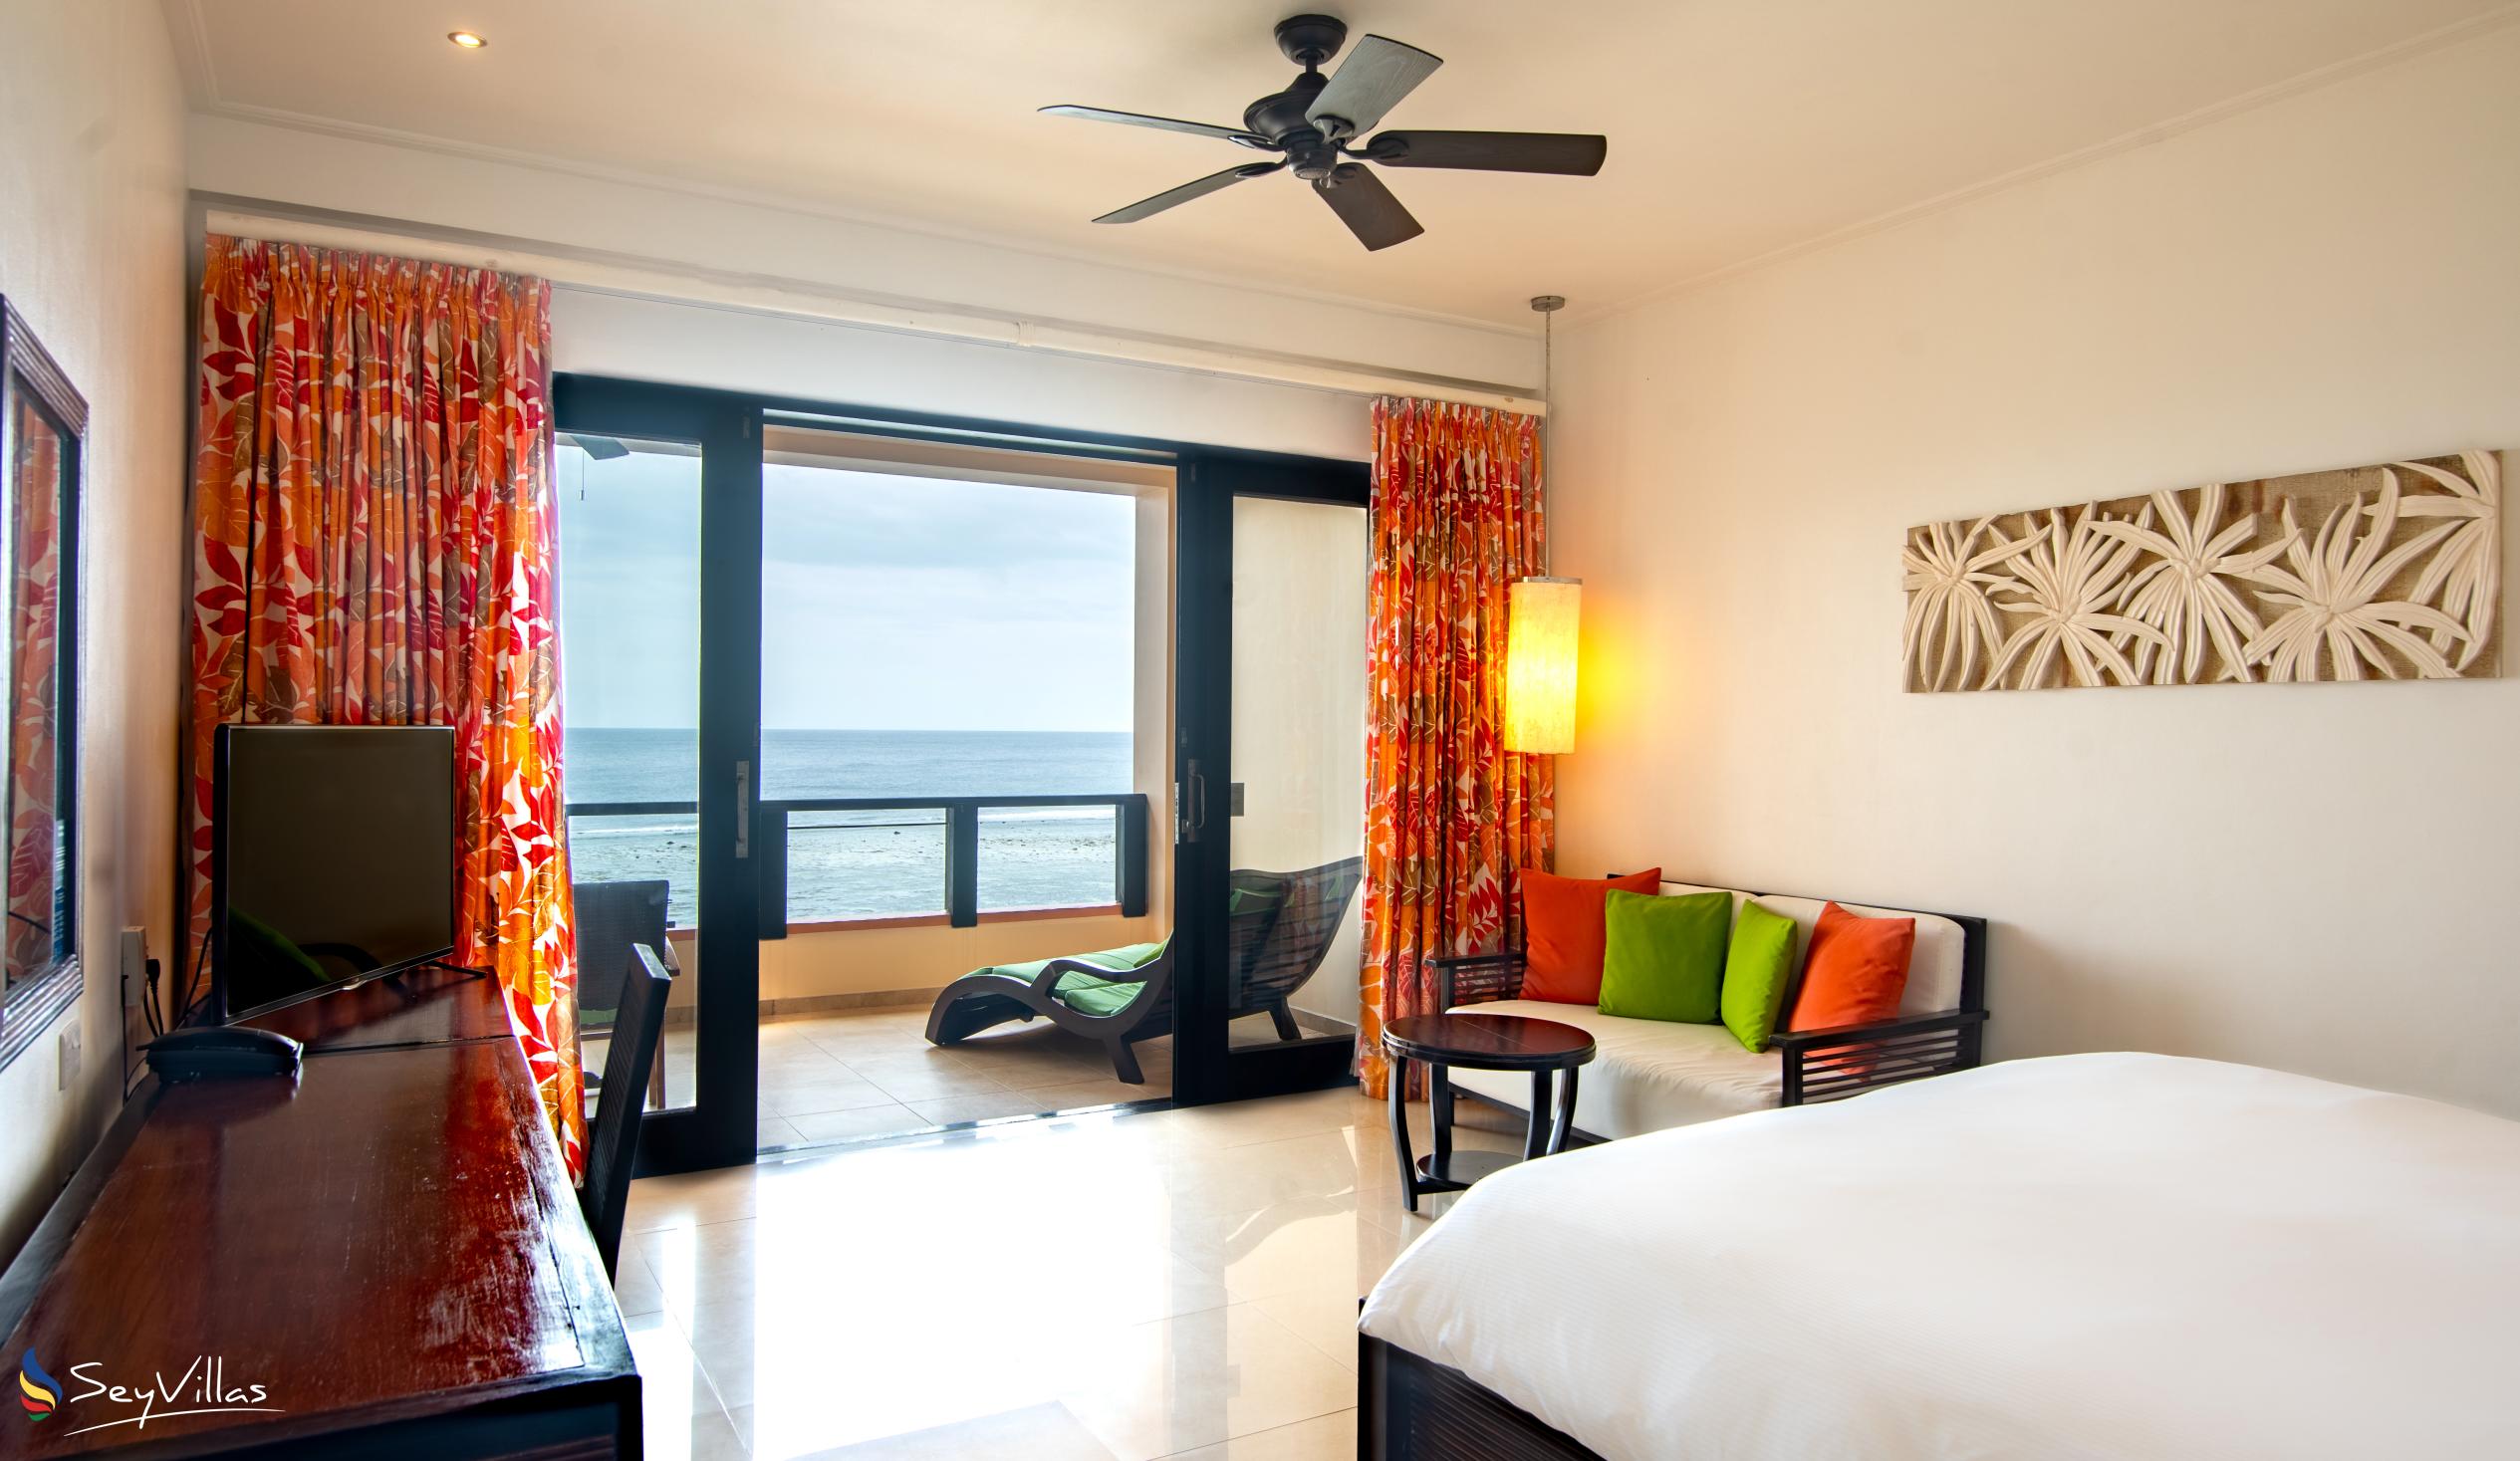 Foto 89: Double Tree by Hilton - Allamanda Resort & Spa - King Grand Deluxe Room with Ocean View - Mahé (Seychelles)